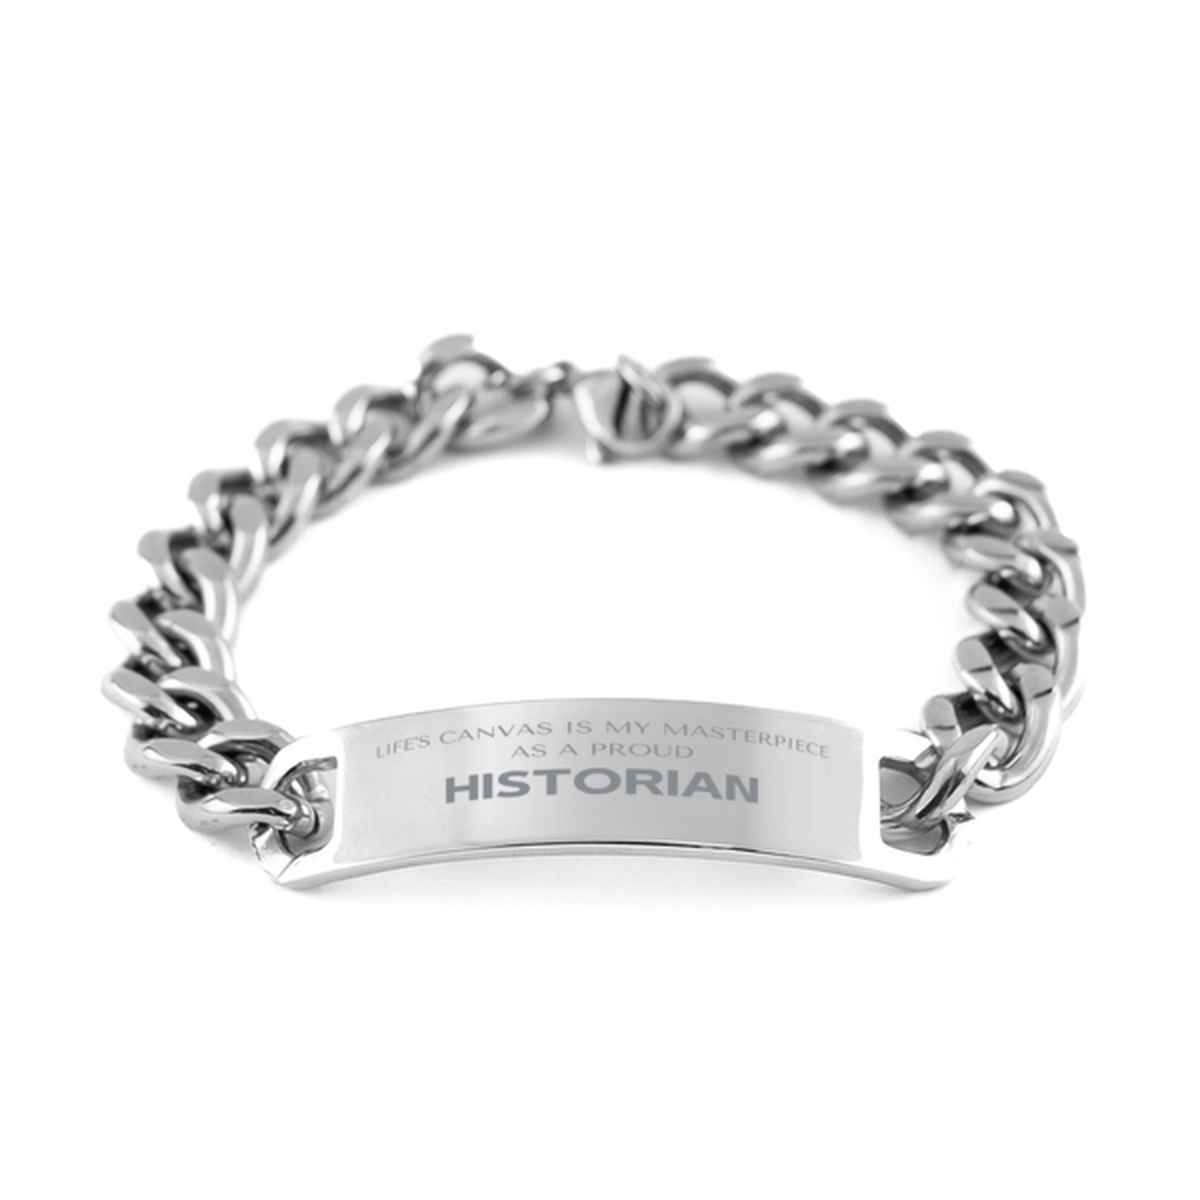 Proud Historian Gifts, Life's canvas is my masterpiece, Epic Birthday Christmas Unique Cuban Chain Stainless Steel Bracelet For Historian, Coworkers, Men, Women, Friends